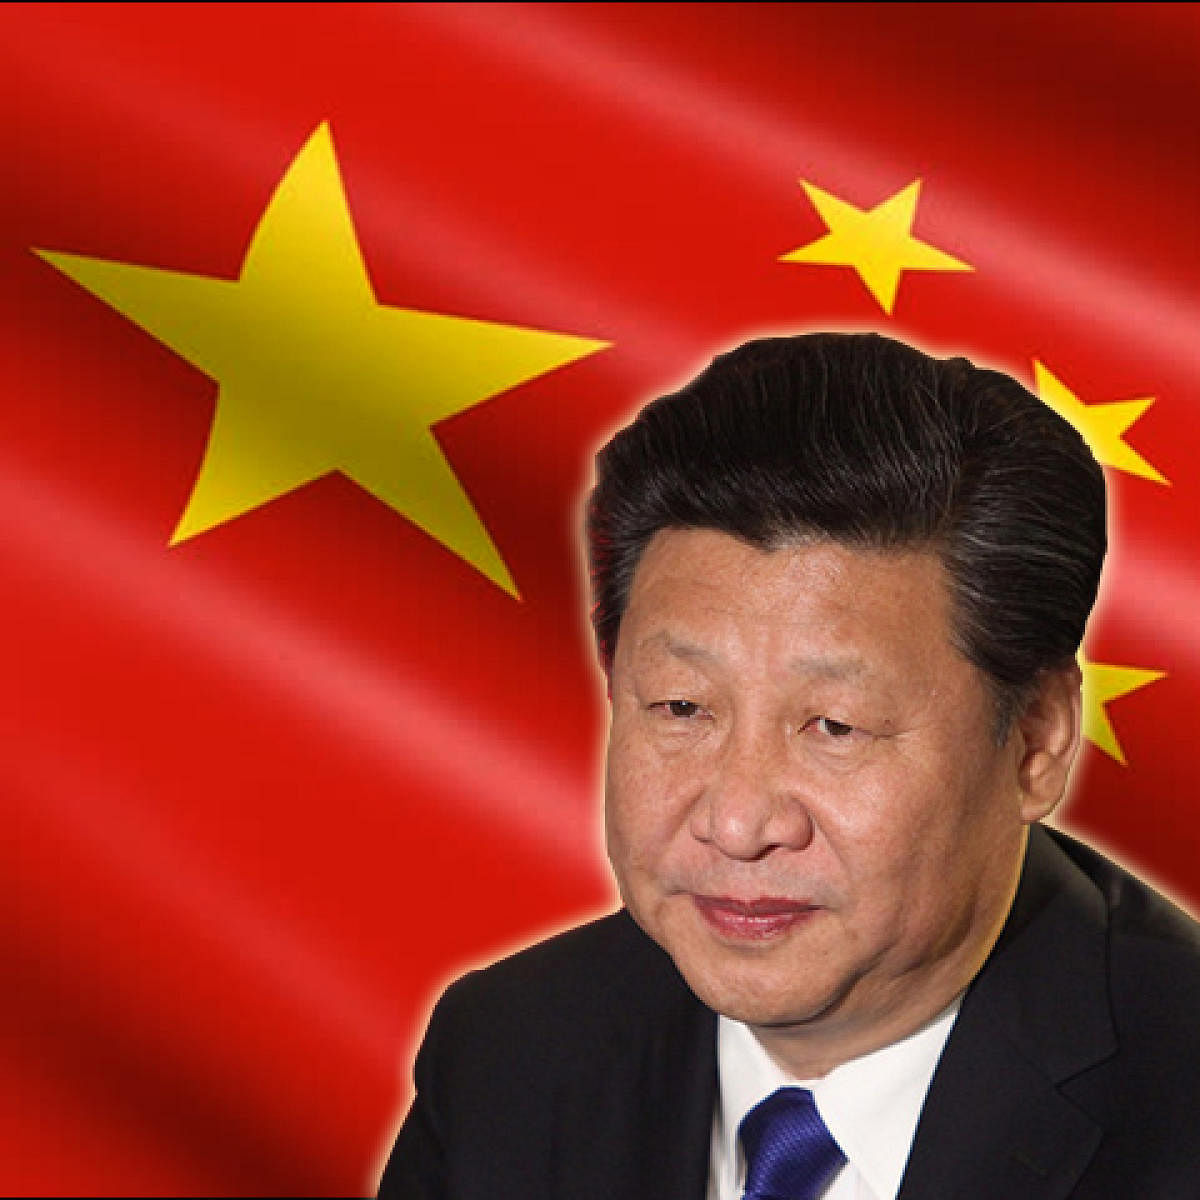 Xi Jinping risen as one of the most powerful leaders in the world today.